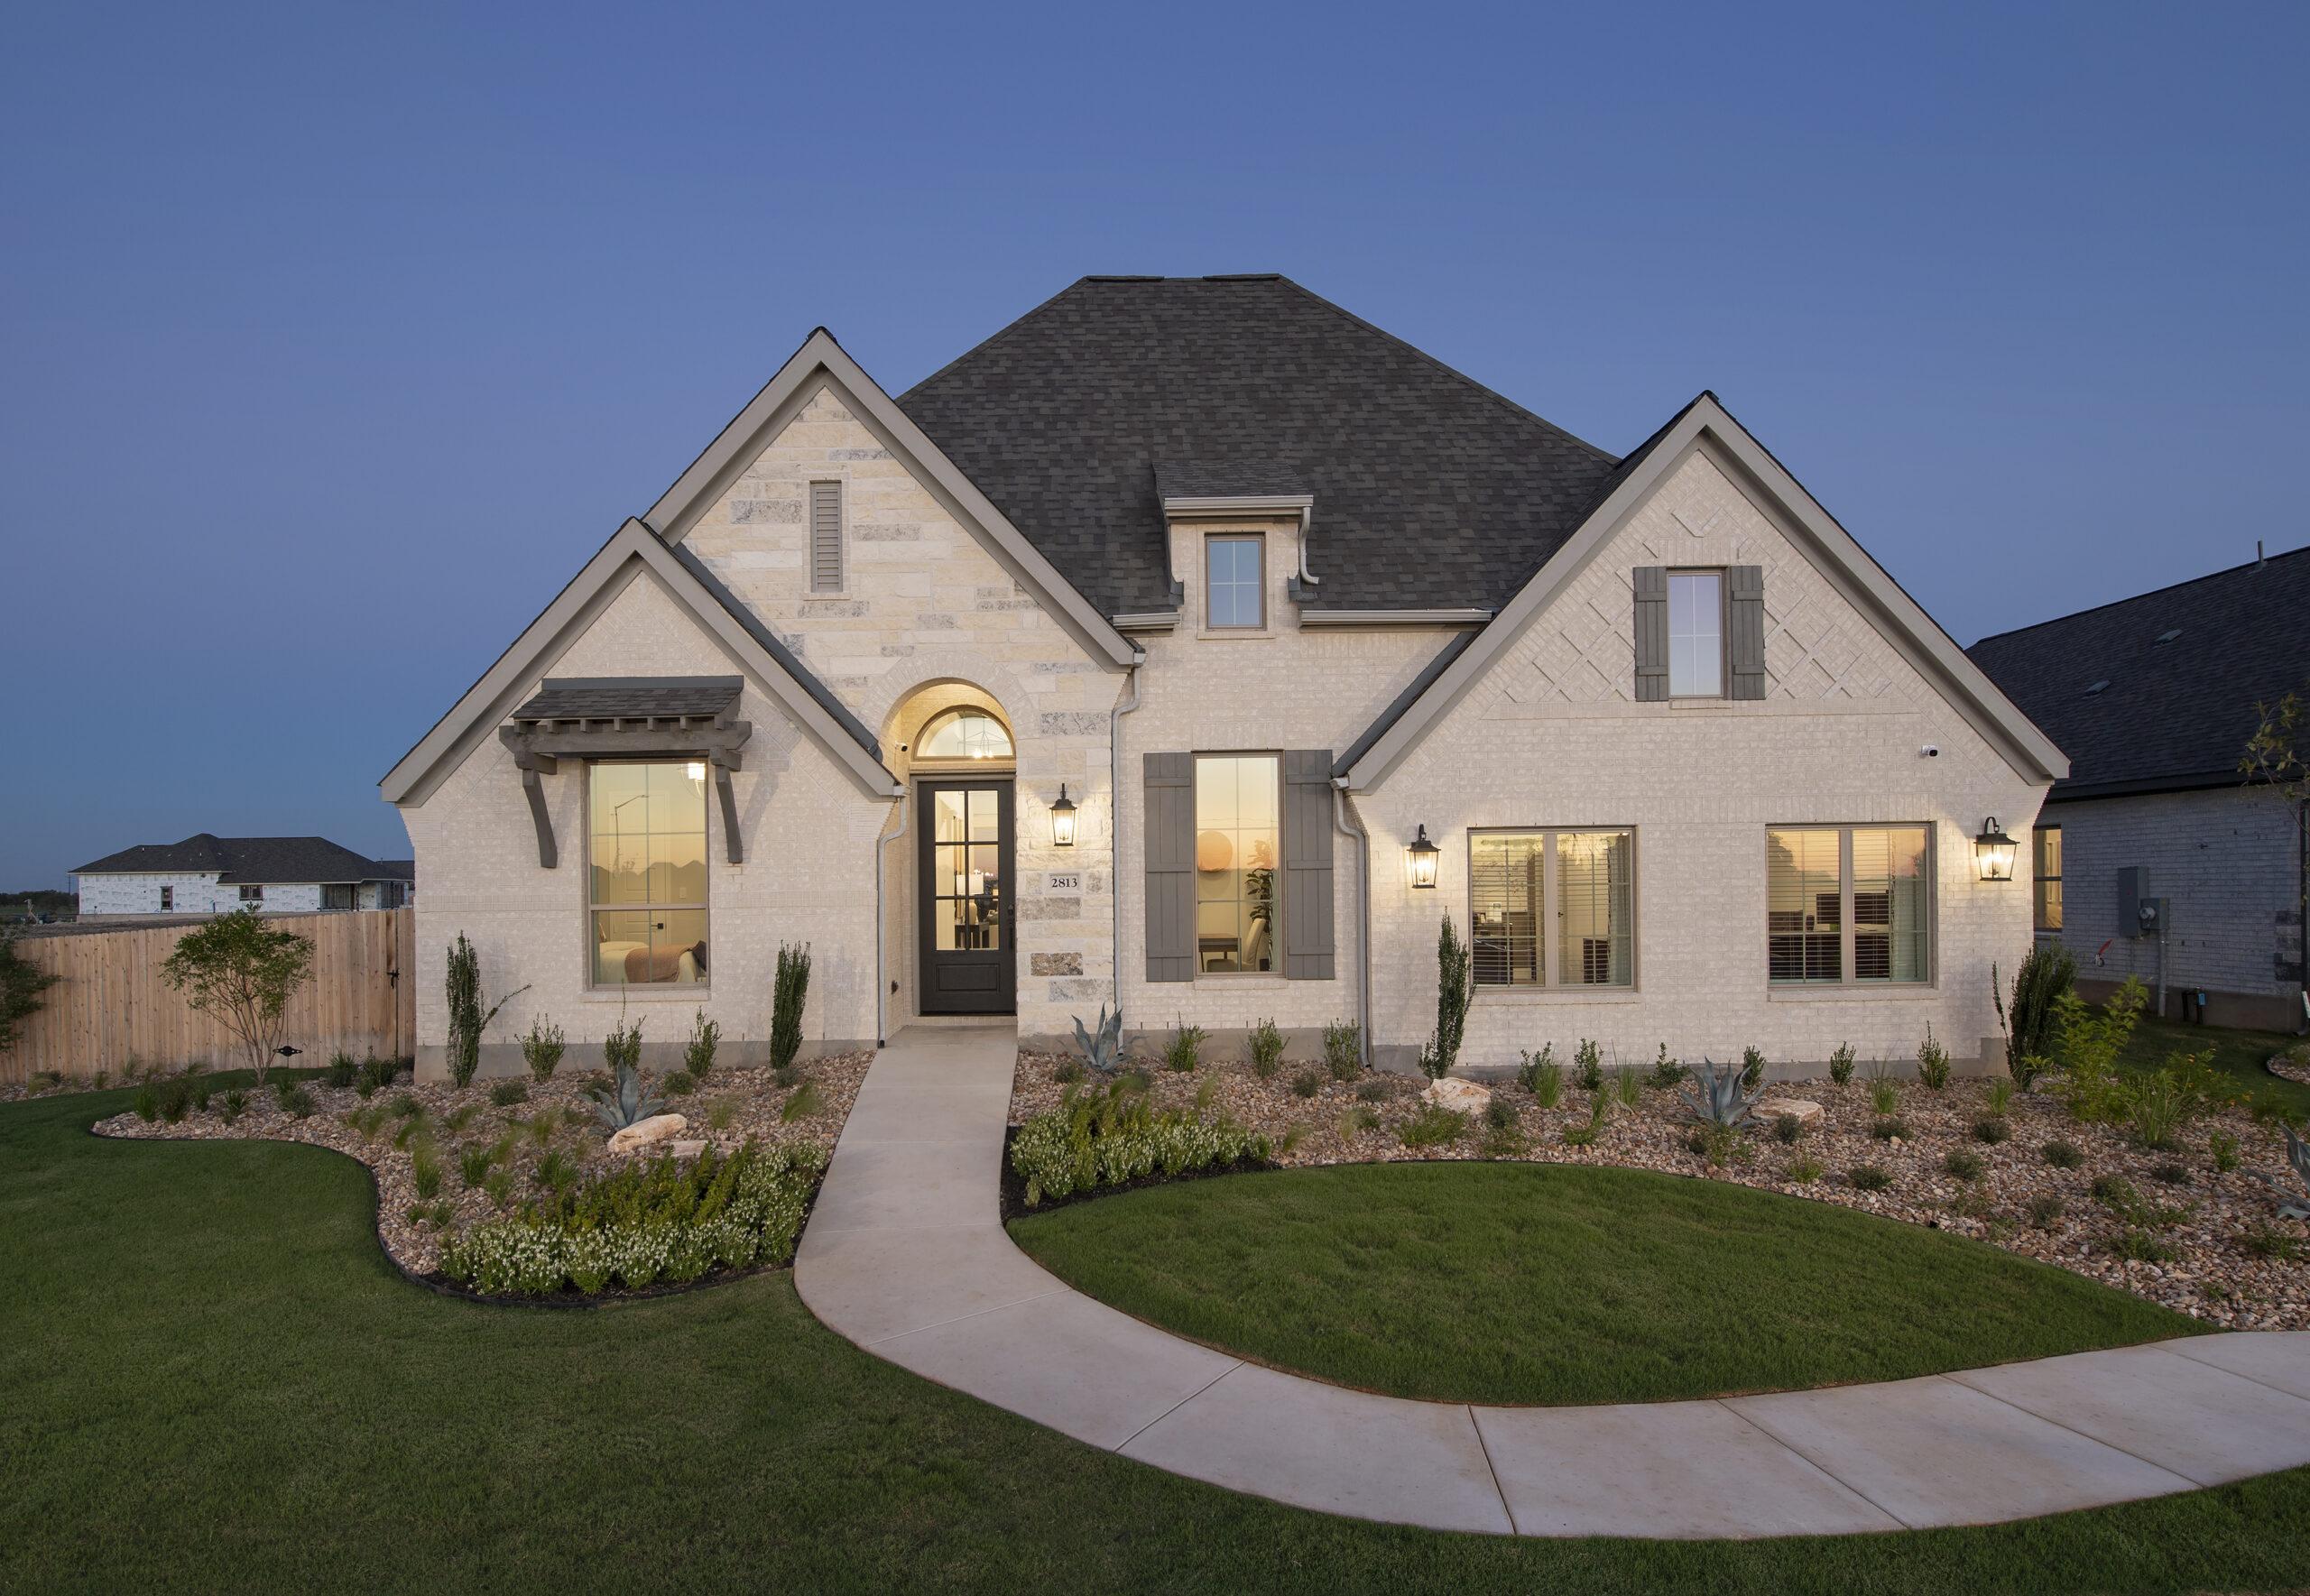 A single-story suburban house in New Braunfels with exterior lighting on at dusk.